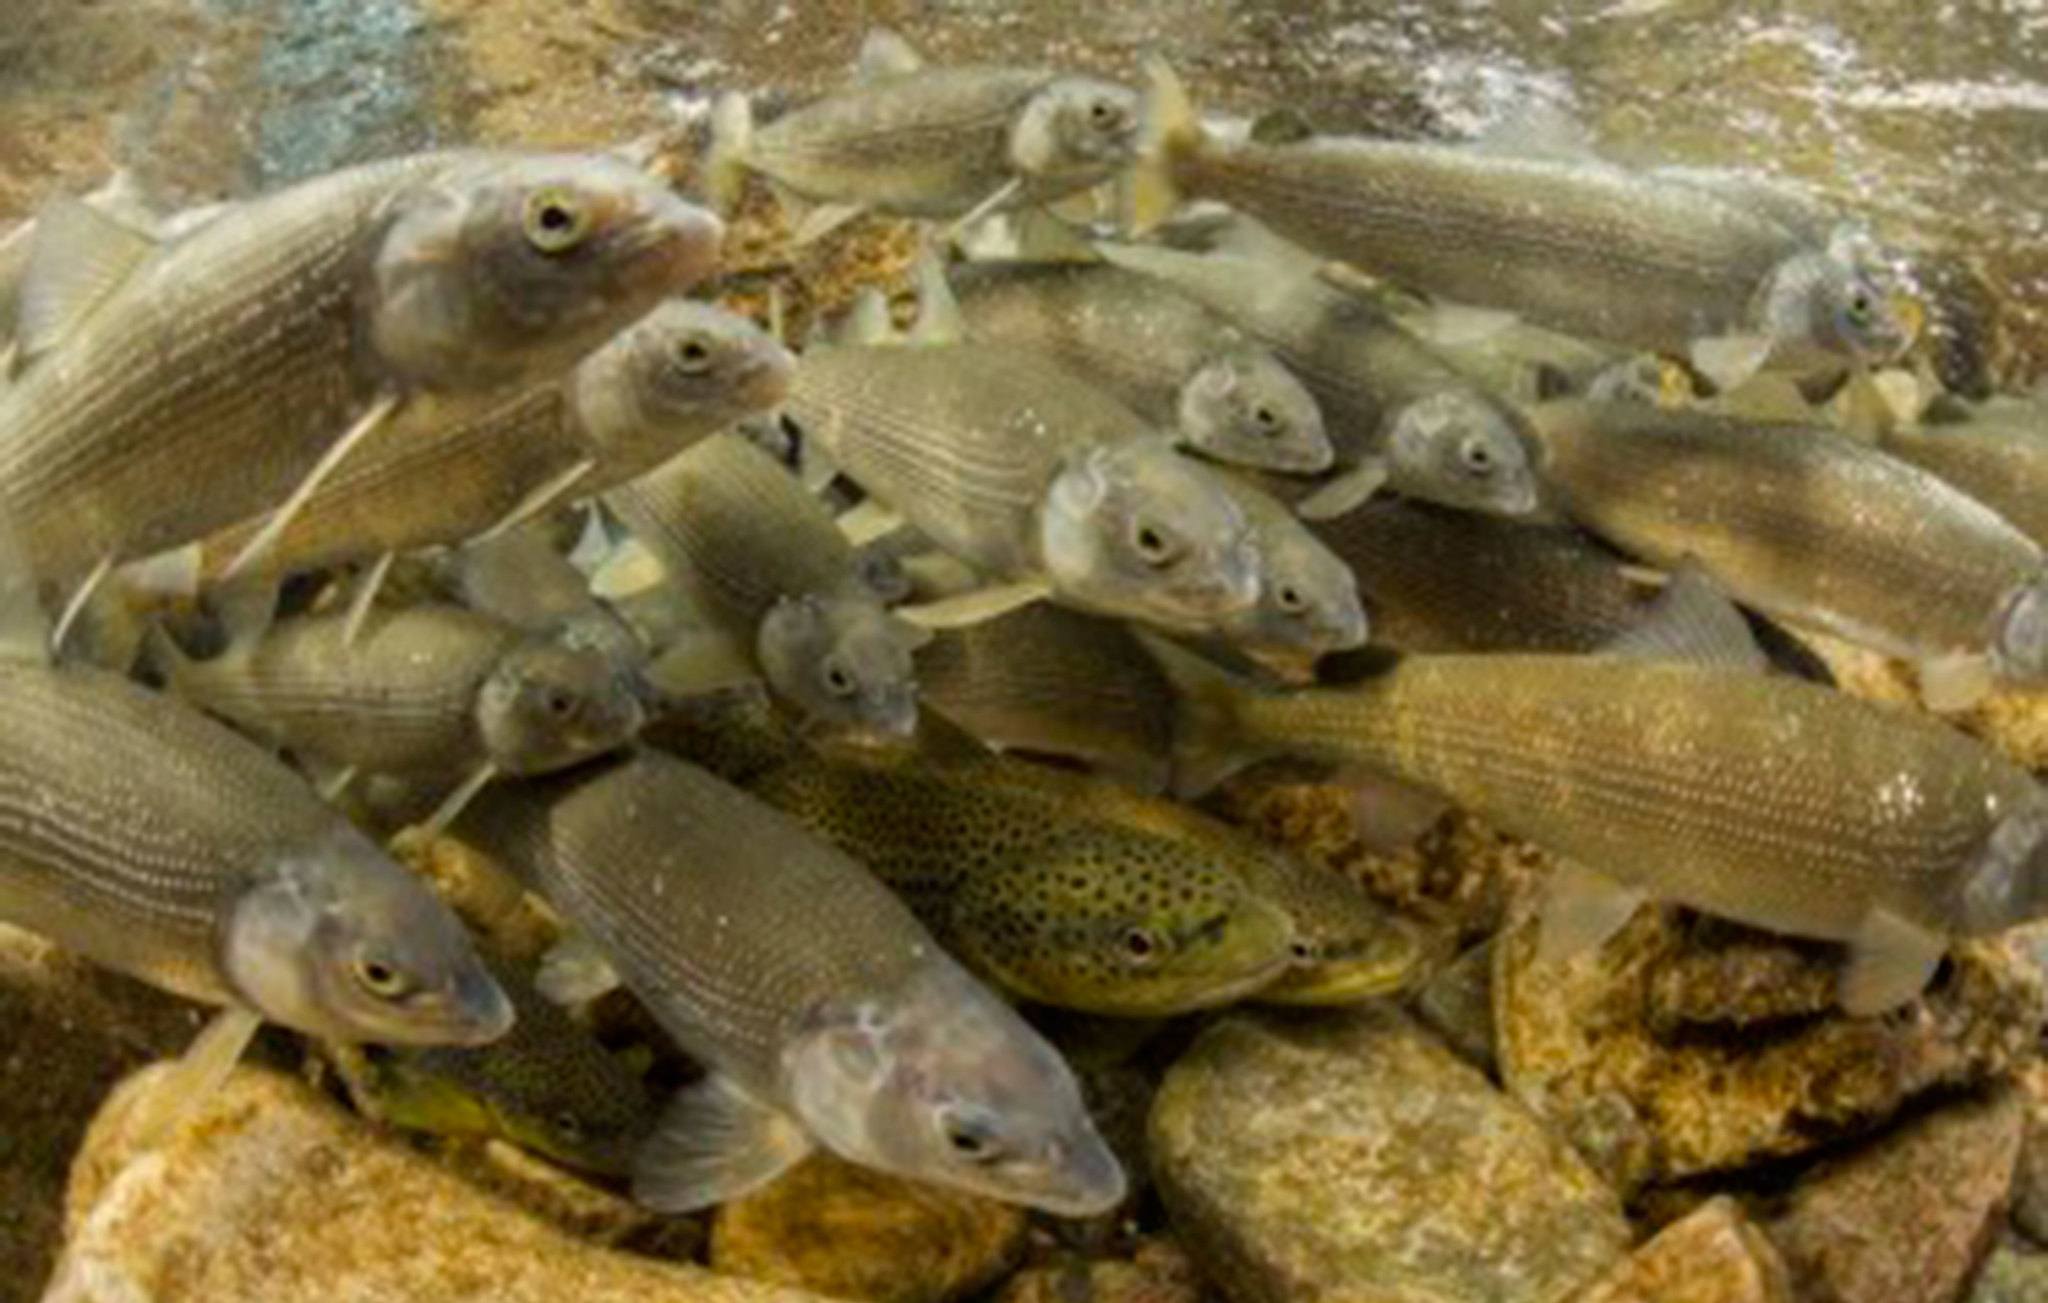 Human interaction harms some fish, helps others